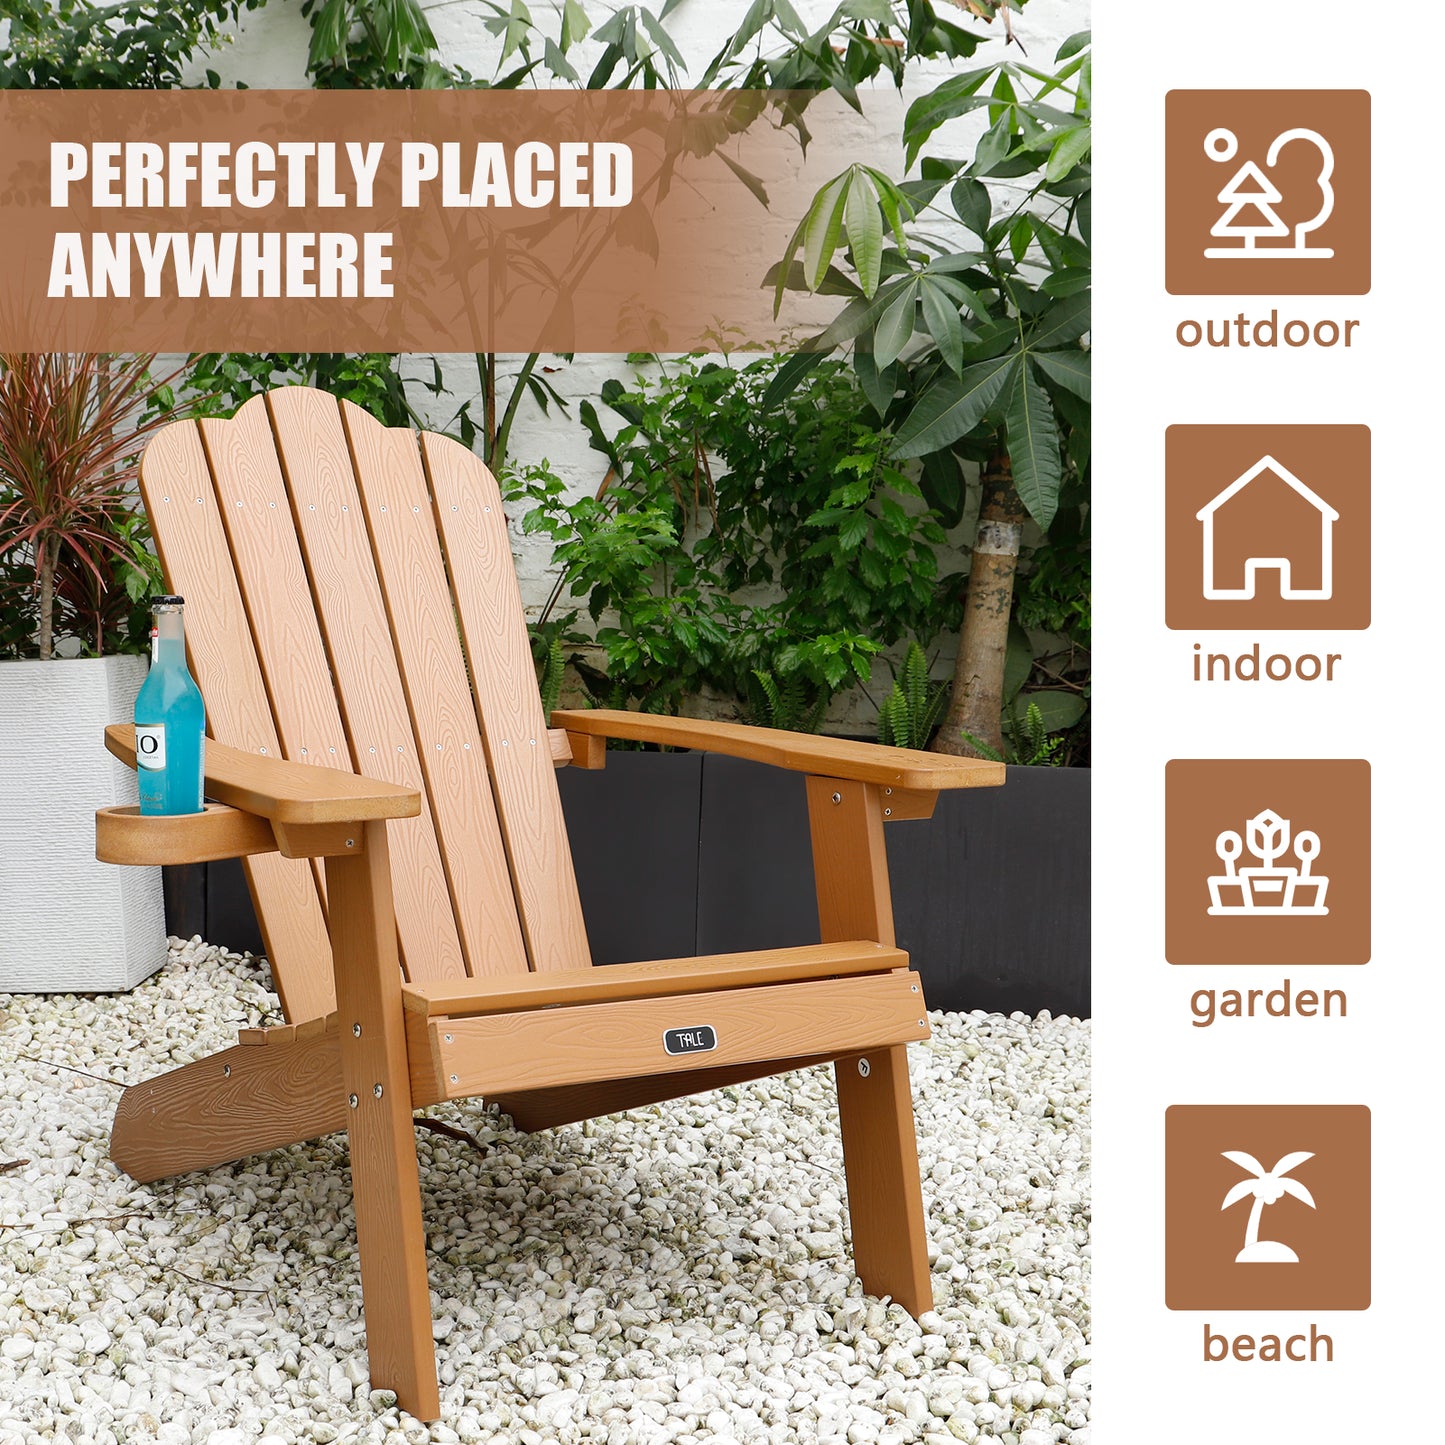 TALE Adirondack Chairs, All Weather Resistant, High Plastic Wood, Patio Chairs, Fire Pit Chairs, with Cup Holder, Perfect for Outdoor, Deck, Outside, Garden, Campfire Chairs, Easy Installation, Brown